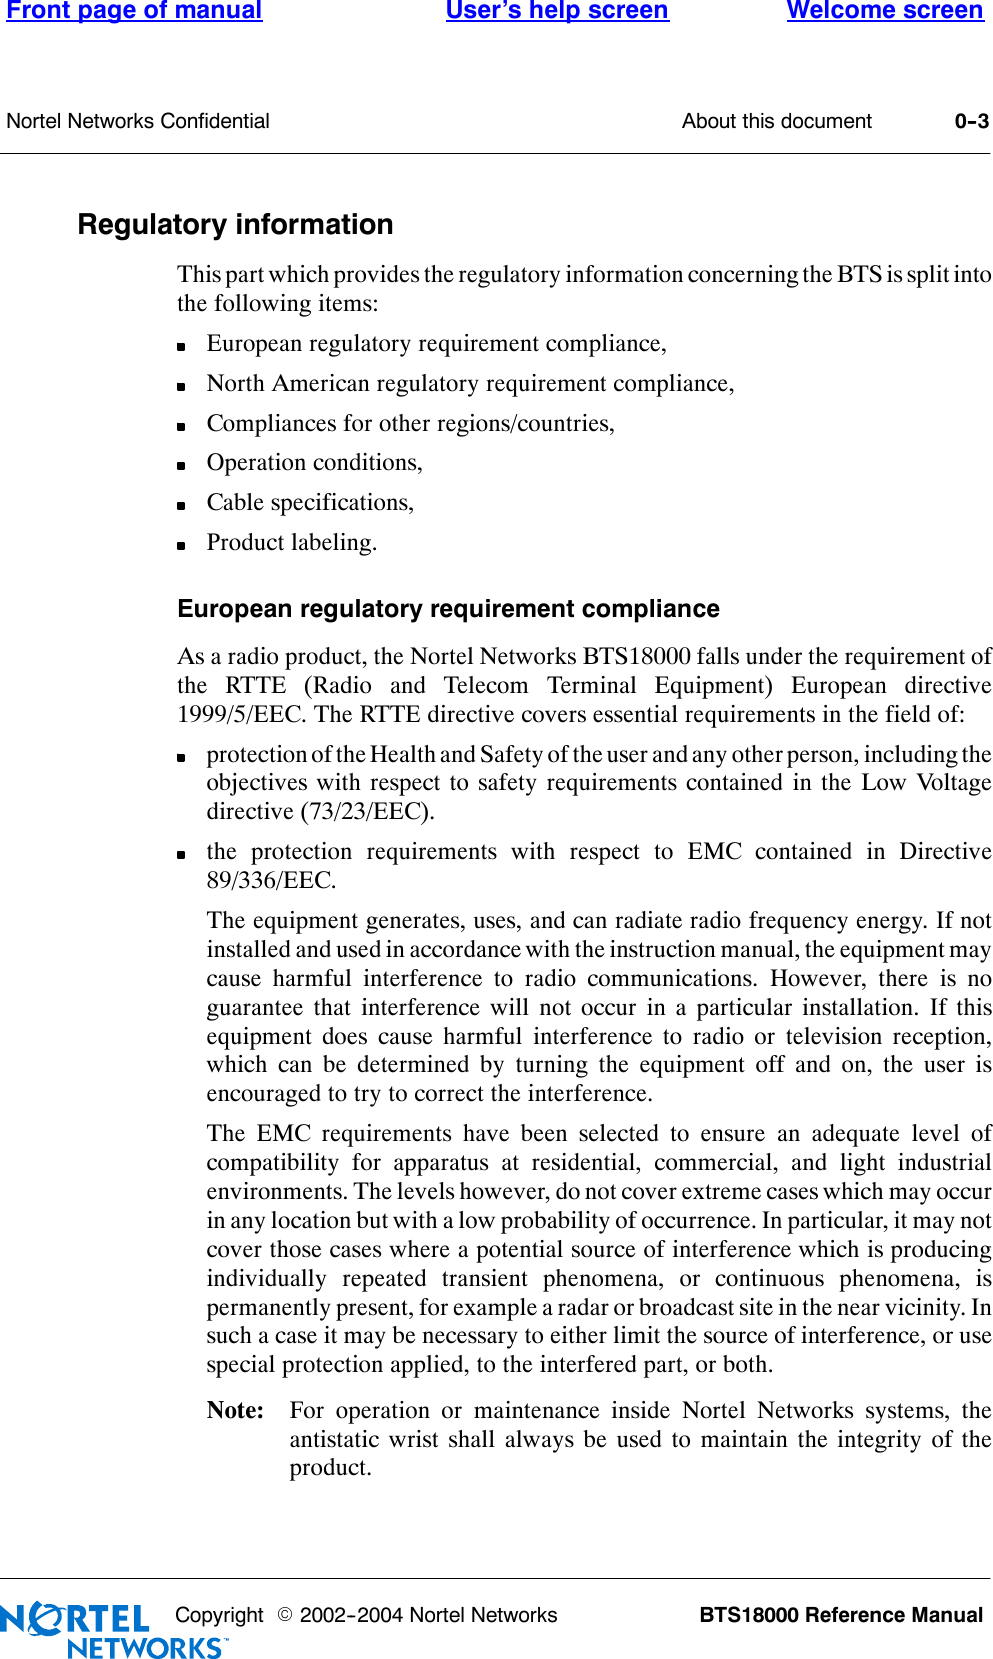 About this documentFront page of manual Welcome screenUser’s help screenNortel Networks Confidential 0--3BTS18000 Reference ManualCopyright E2002--2004 Nortel NetworksRegulatory informationThis part which provides the regulatory information concerning the BTS is split intothe following items:European regulatory requirement compliance,North American regulatory requirement compliance,Compliances for other regions/countries,Operation conditions,Cable specifications,Product labeling.European regulatory requirement complianceAs a radio product, the Nortel Networks BTS18000 falls under the requirement ofthe RTTE (Radio and Telecom Terminal Equipment) European directive1999/5/EEC. The RTTE directive covers essential requirements in the field of:protection of the Health and Safety of the user and any other person, including theobjectives with respect to safety requirements contained in the Low Voltagedirective (73/23/EEC).the protection requirements with respect to EMC contained in Directive89/336/EEC.The equipment generates, uses, and can radiate radio frequency energy. If notinstalled and used in accordance with the instruction manual, the equipment maycause harmful interference to radio communications. However, there is noguarantee that interference will not occur in a particular installation. If thisequipment does cause harmful interference to radio or television reception,which can be determined by turning the equipment off and on, the user isencouraged to try to correct the interference.The EMC requirements have been selected to ensure an adequate level ofcompatibility for apparatus at residential, commercial, and light industrialenvironments. The levels however, do not cover extreme cases which may occurin any location but with a low probability of occurrence. In particular, it may notcover those cases where a potential source of interference which is producingindividually repeated transient phenomena, or continuous phenomena, ispermanently present, for example a radar or broadcast site in the near vicinity. Insuch a case it may be necessary to either limit the source of interference, or usespecial protection applied, to the interfered part, or both.Note: For operation or maintenance inside Nortel Networks systems, theantistatic wrist shall always be used to maintain the integrity of theproduct.